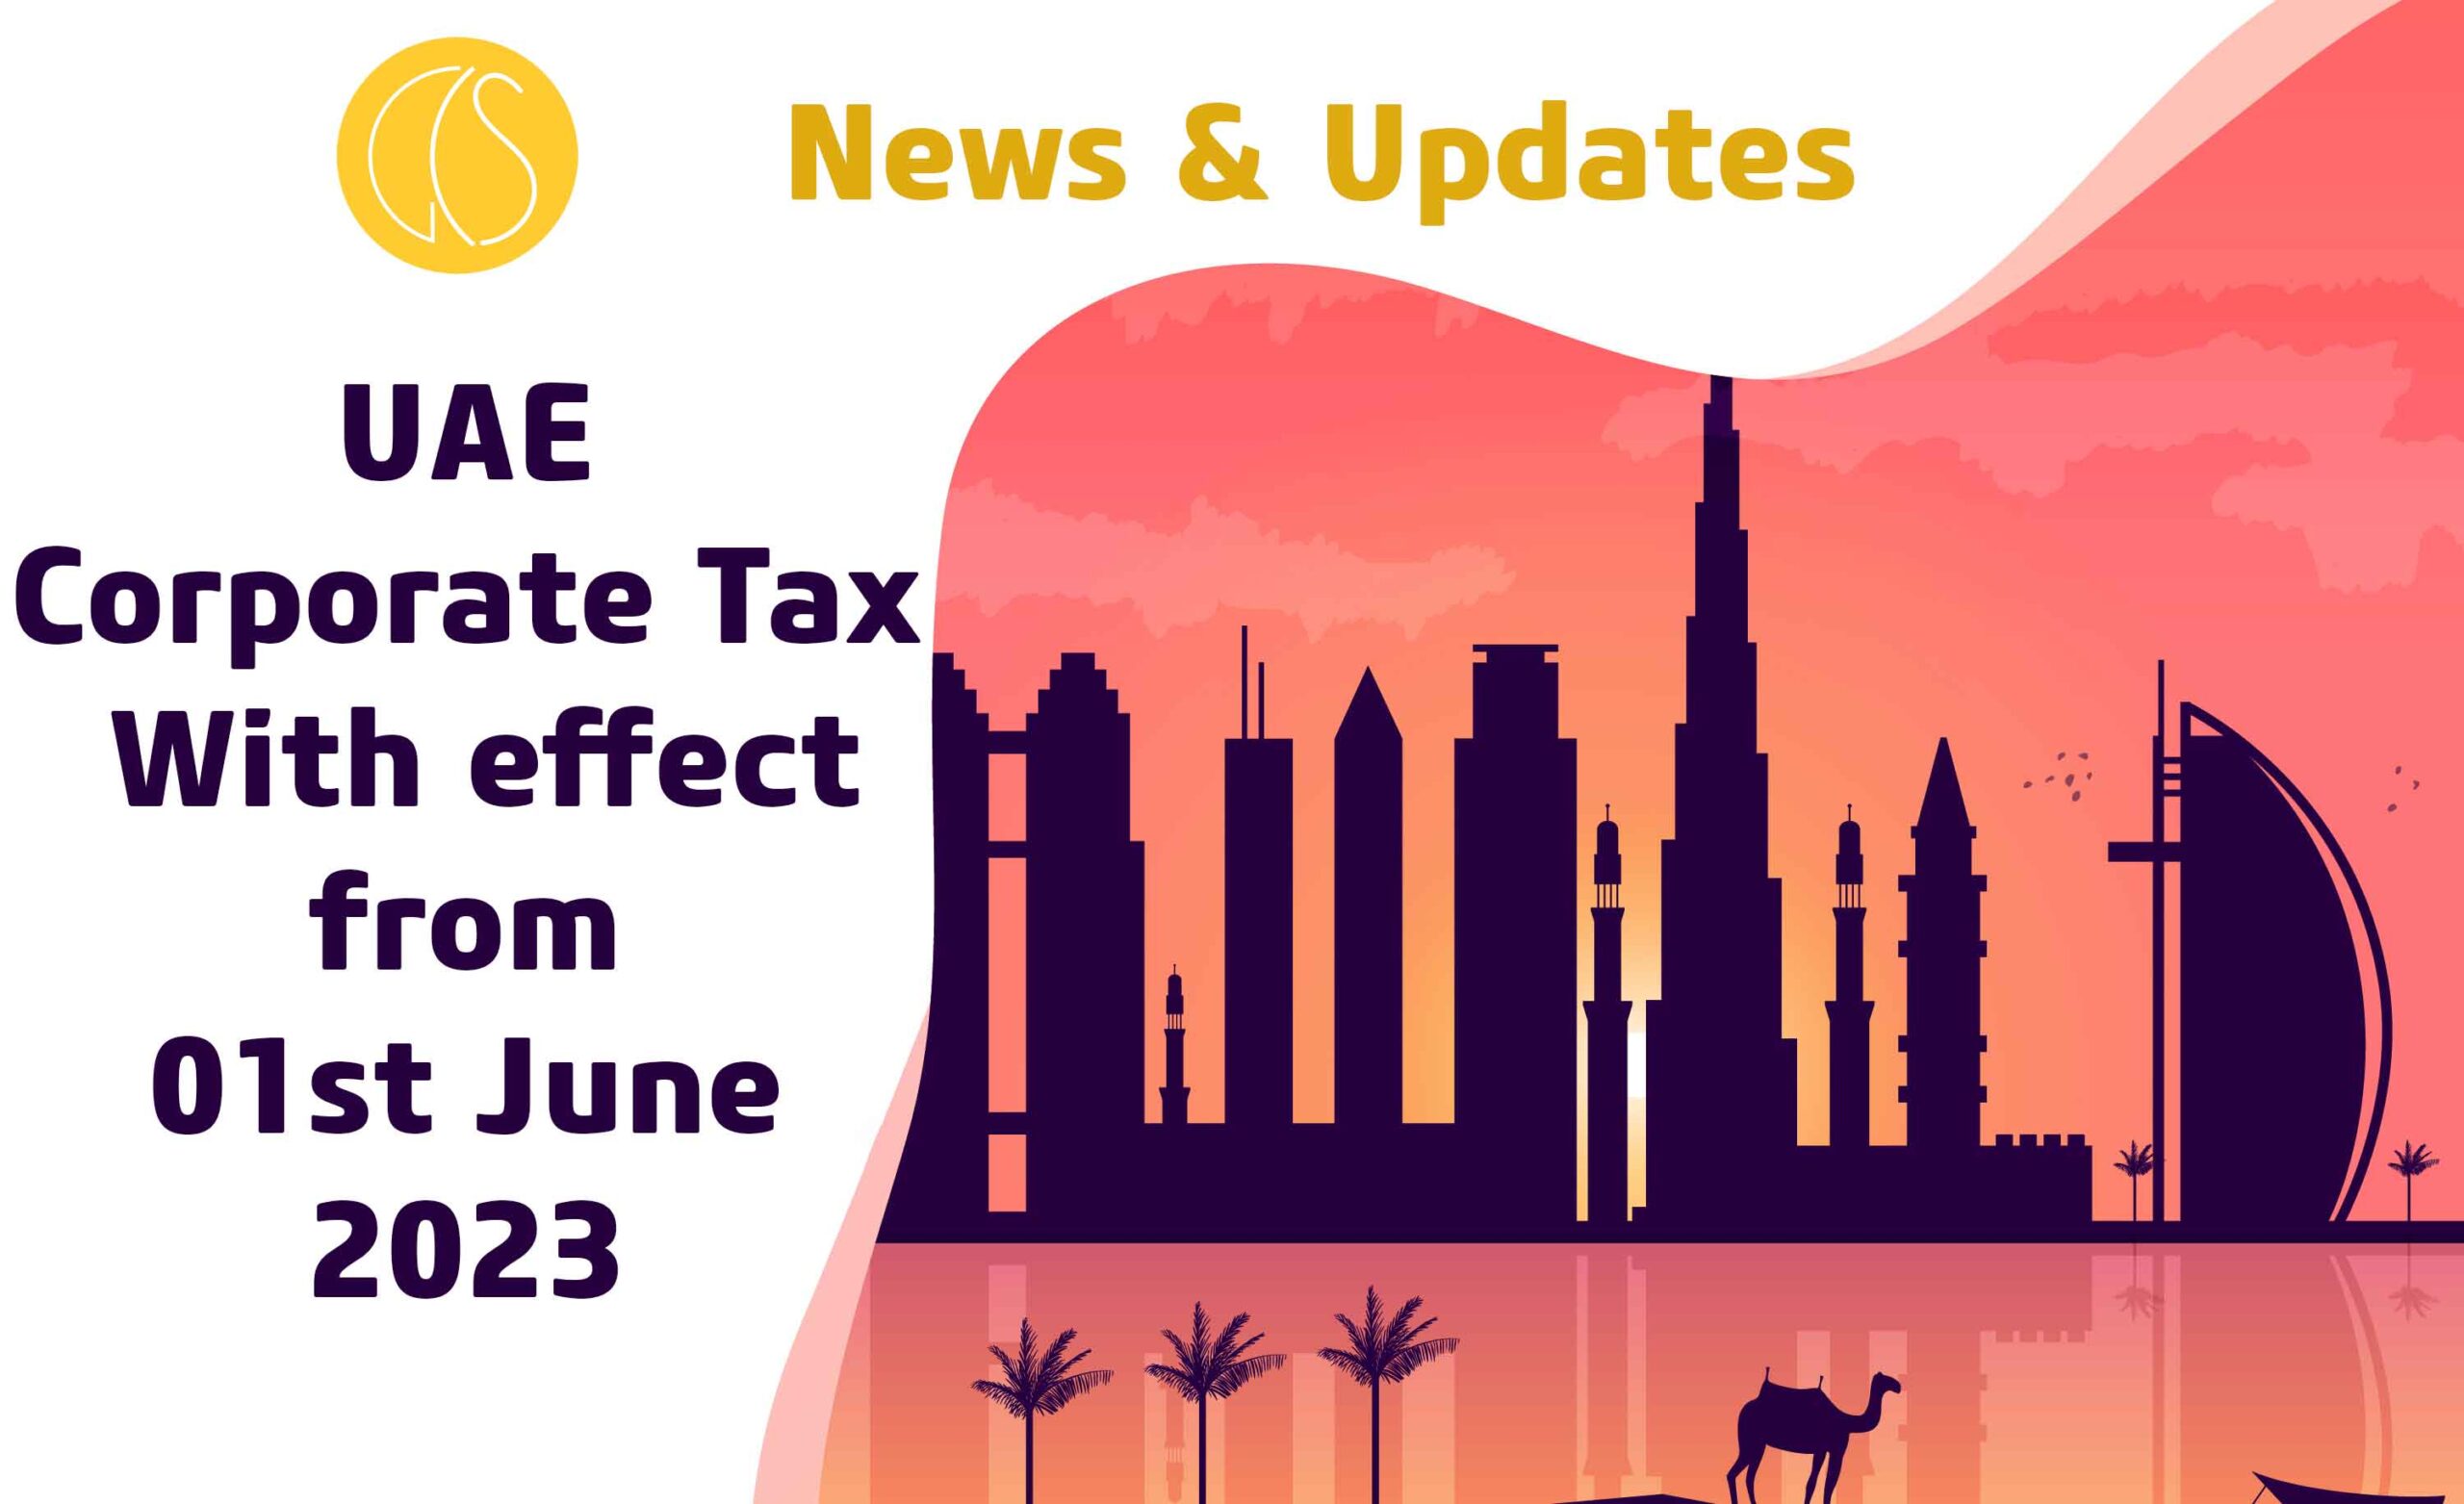 UAE Corporate Tax: With effect from 01st June 2023